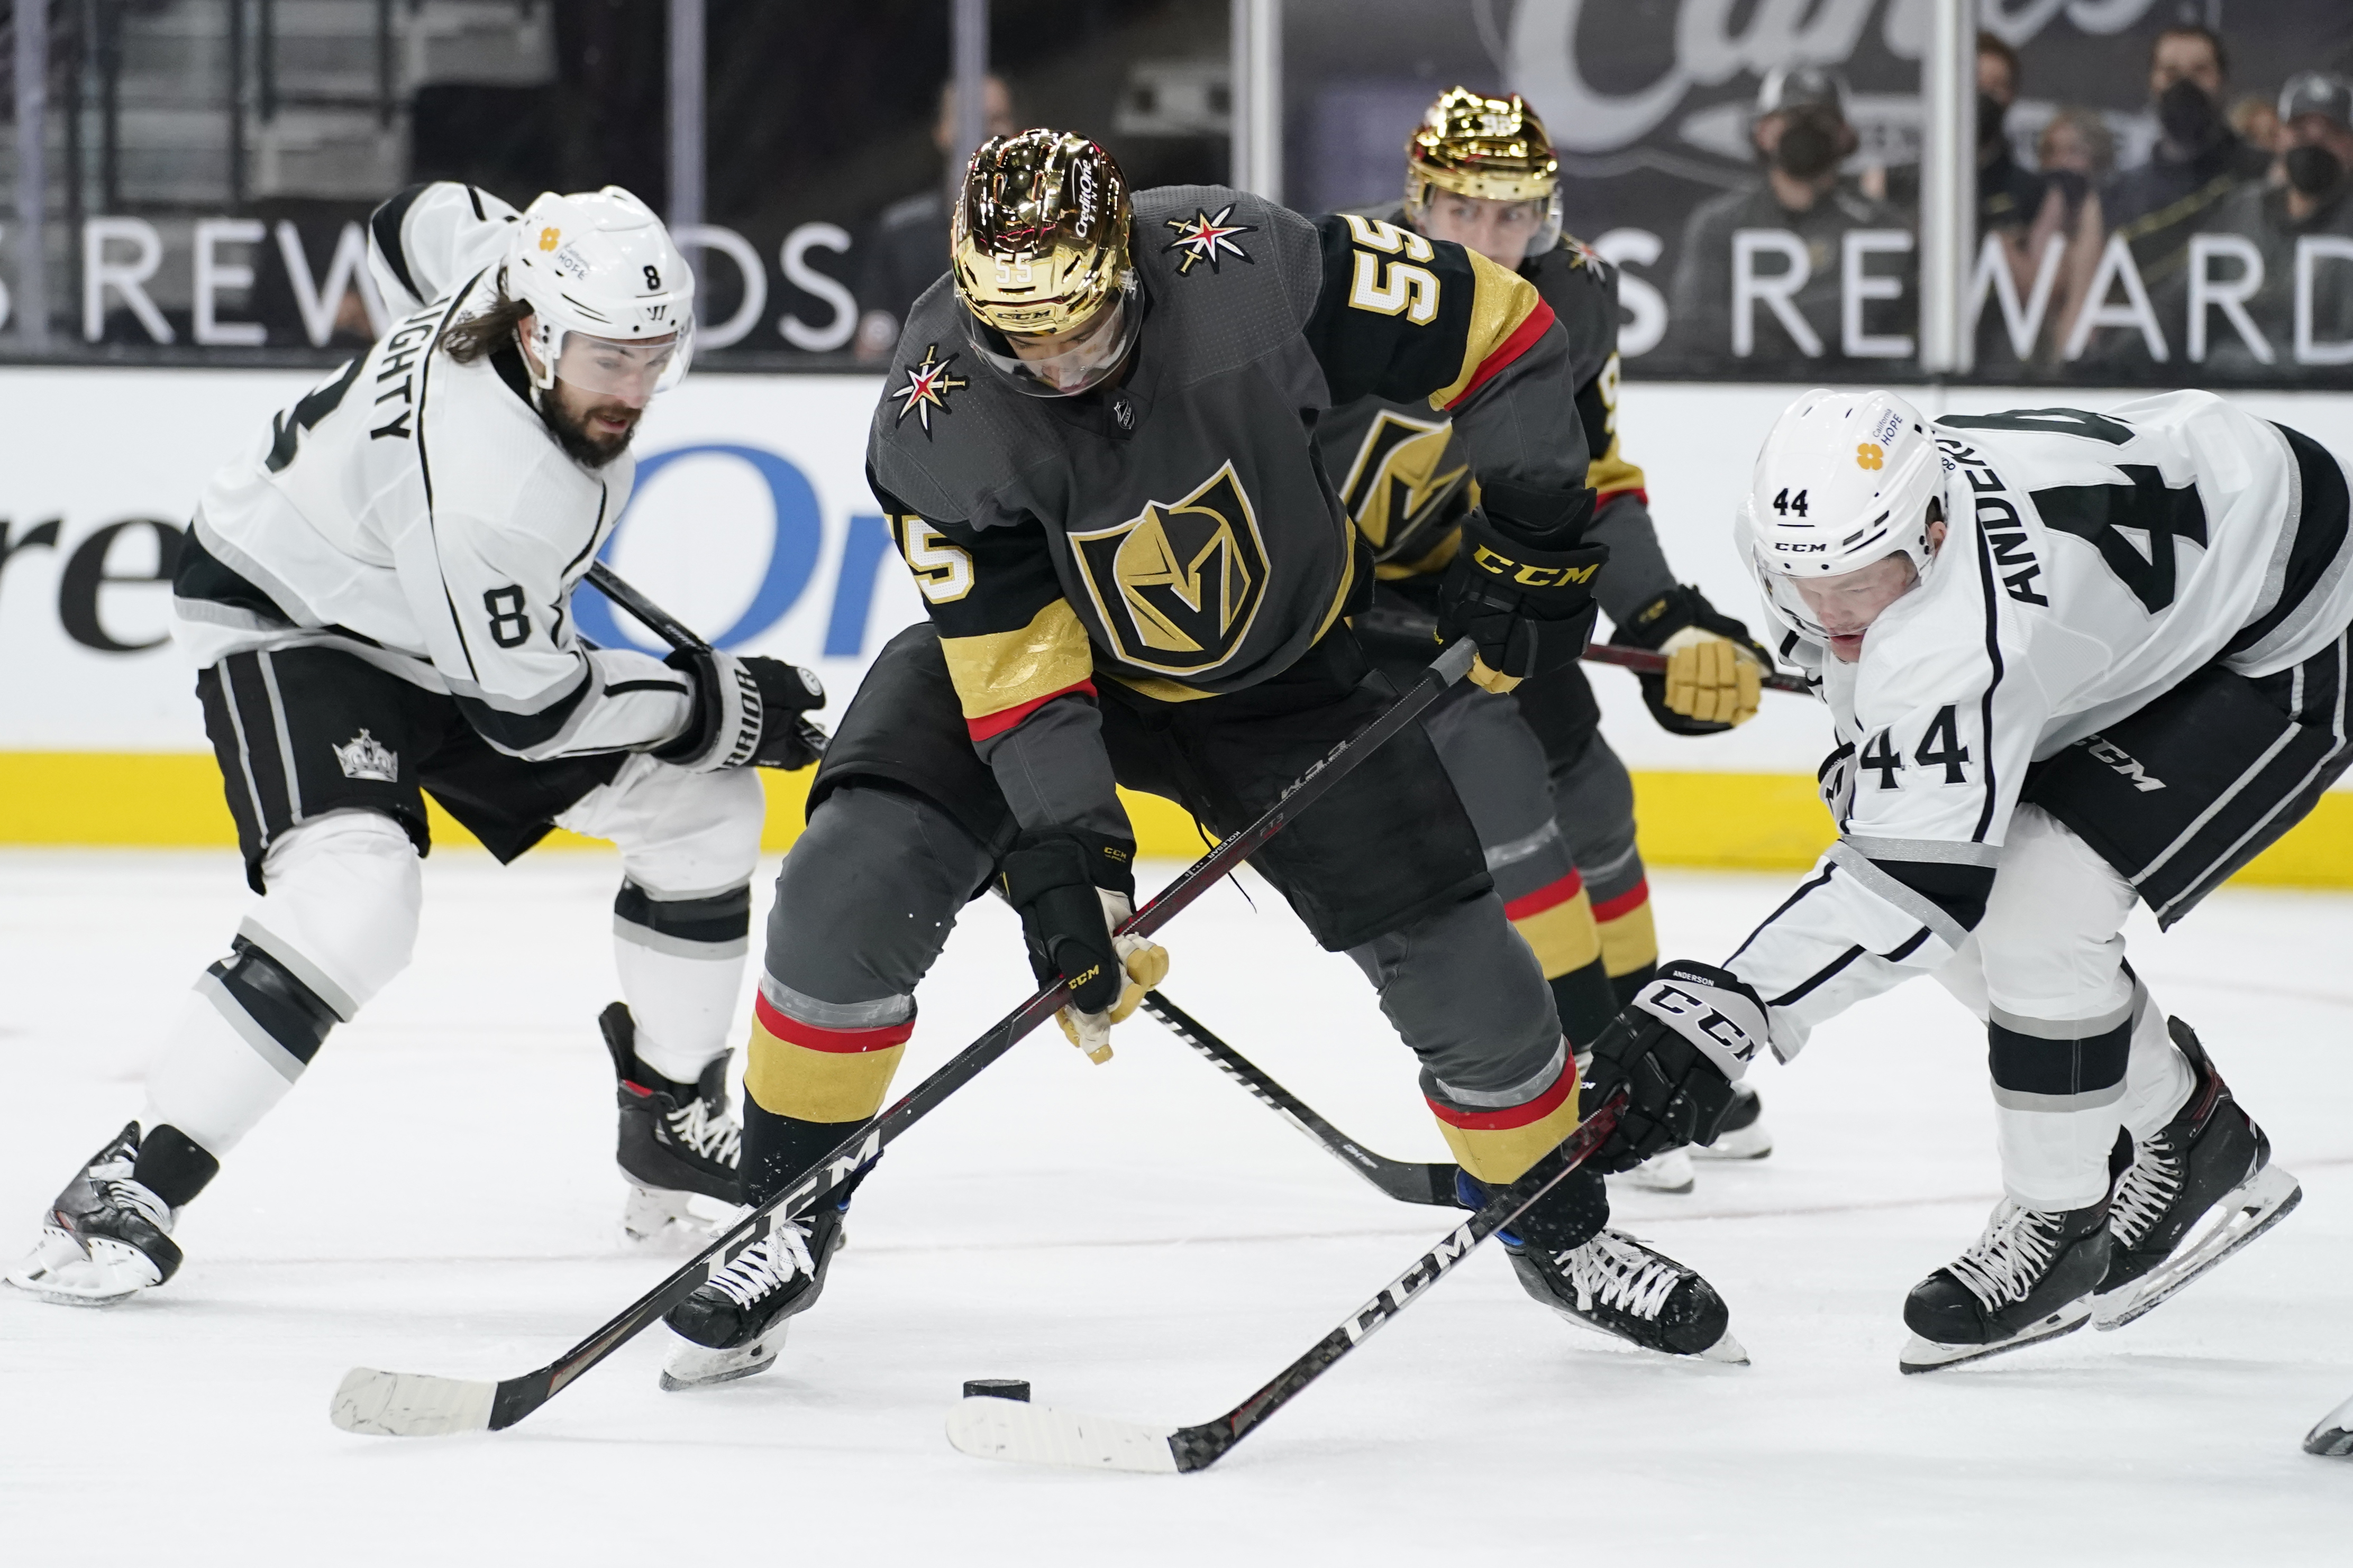 NHL How to LIVE STREAM FREE the Los Angeles Kings at Las Vegas Golden Knights Wednesday (3-31-21)